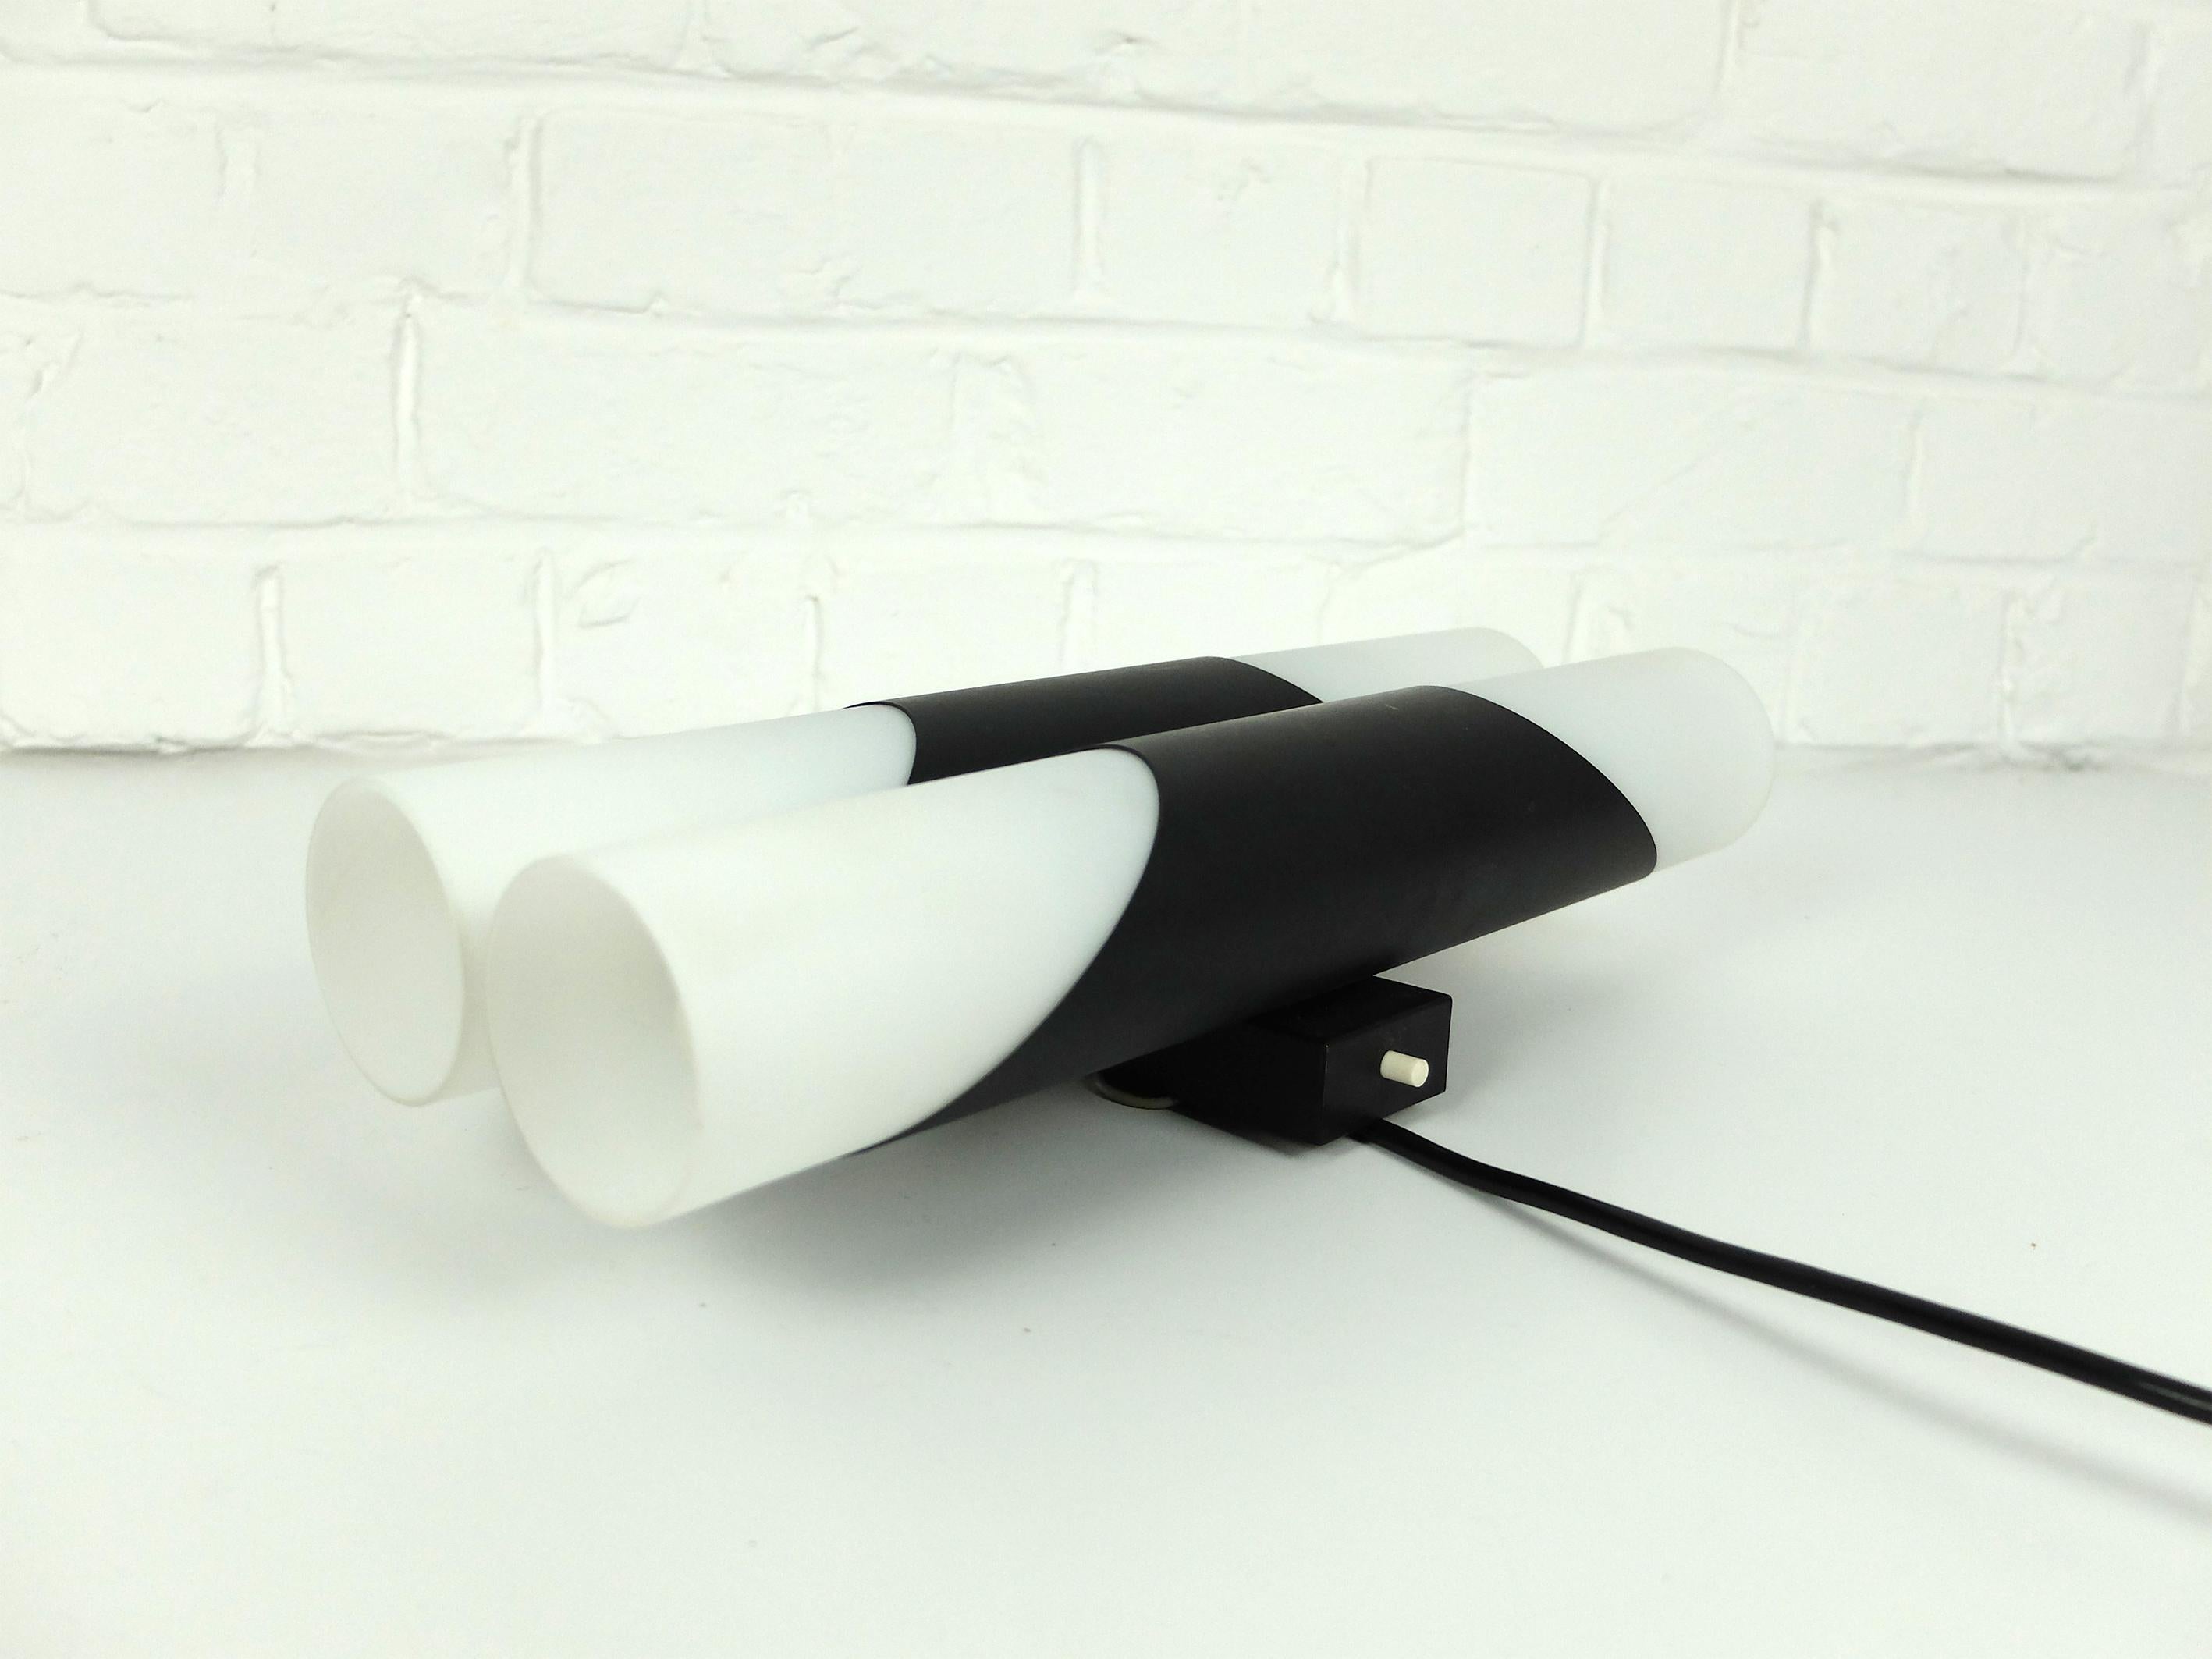 Double Glass Wall Light in black by Rolf Krüger for Paul Neuhaus, Germany 1970 For Sale 2